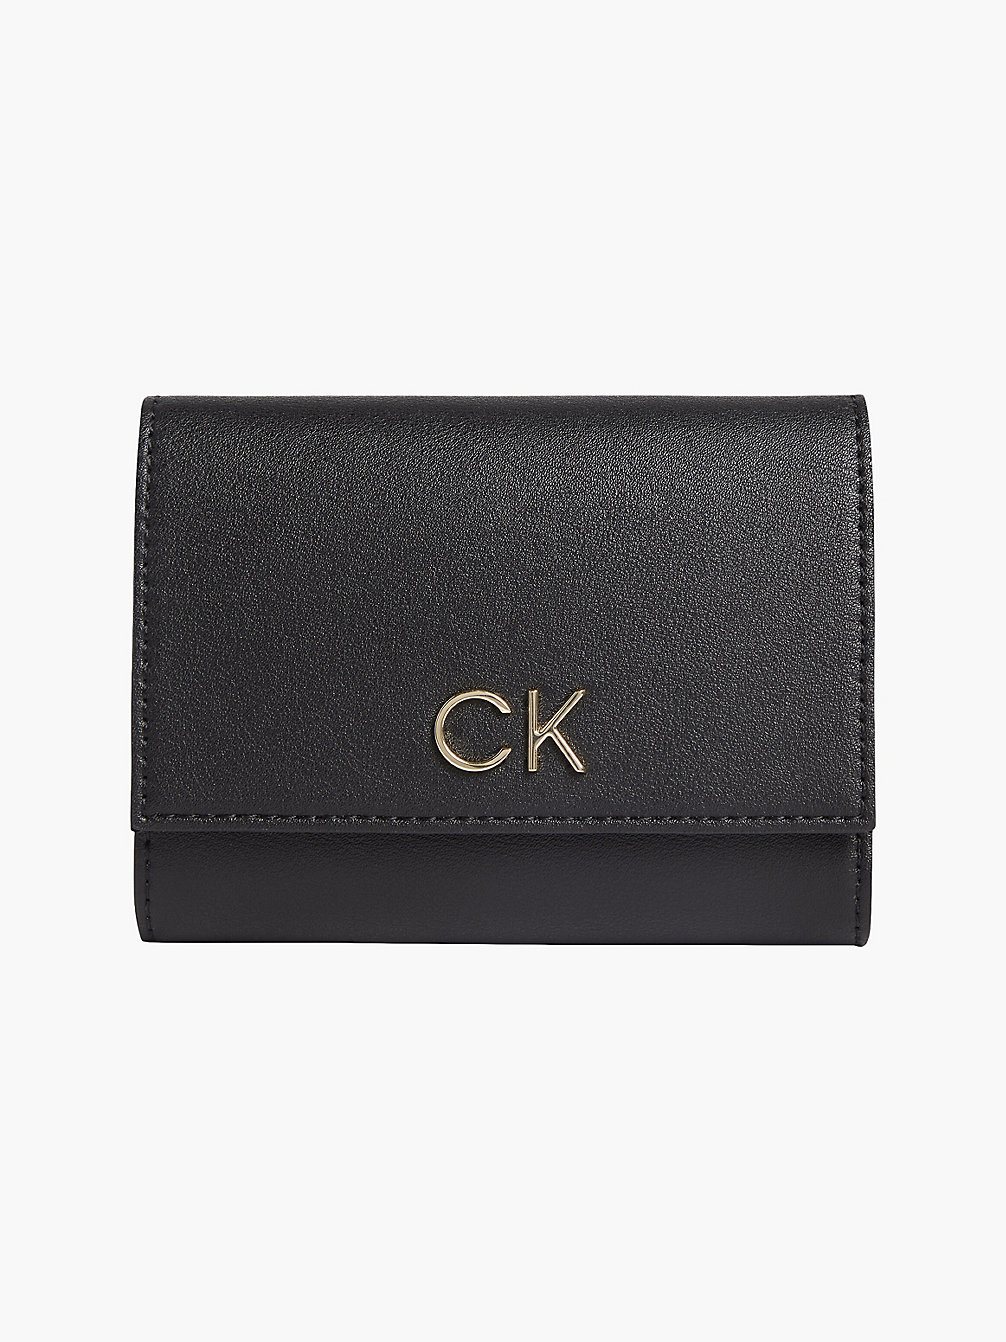 CK BLACK Recycled Faux Leather Trifold Rfid Wallet undefined women Calvin Klein